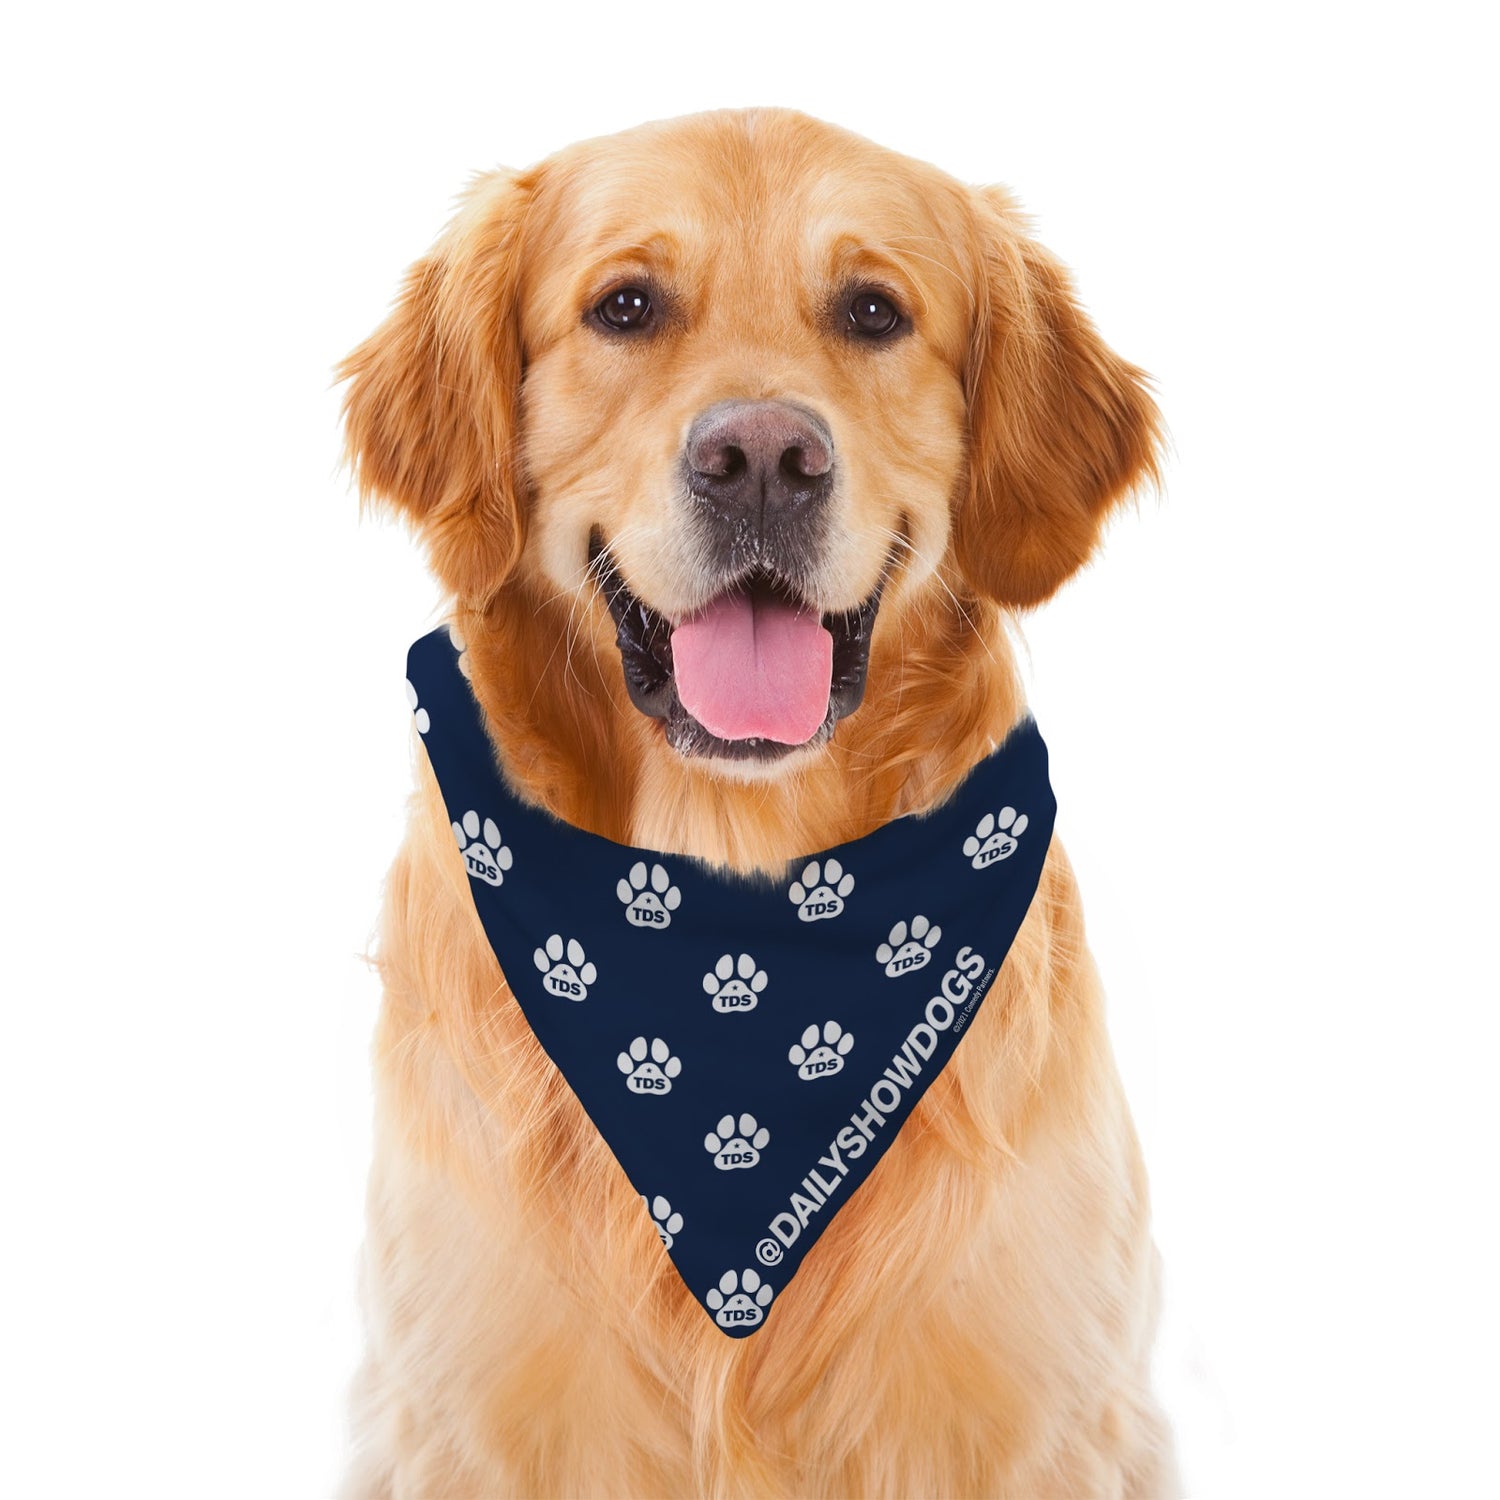 The Daily Show with Trevor Noah: Daily Show Dogs Paw Pattern Pet Bandana